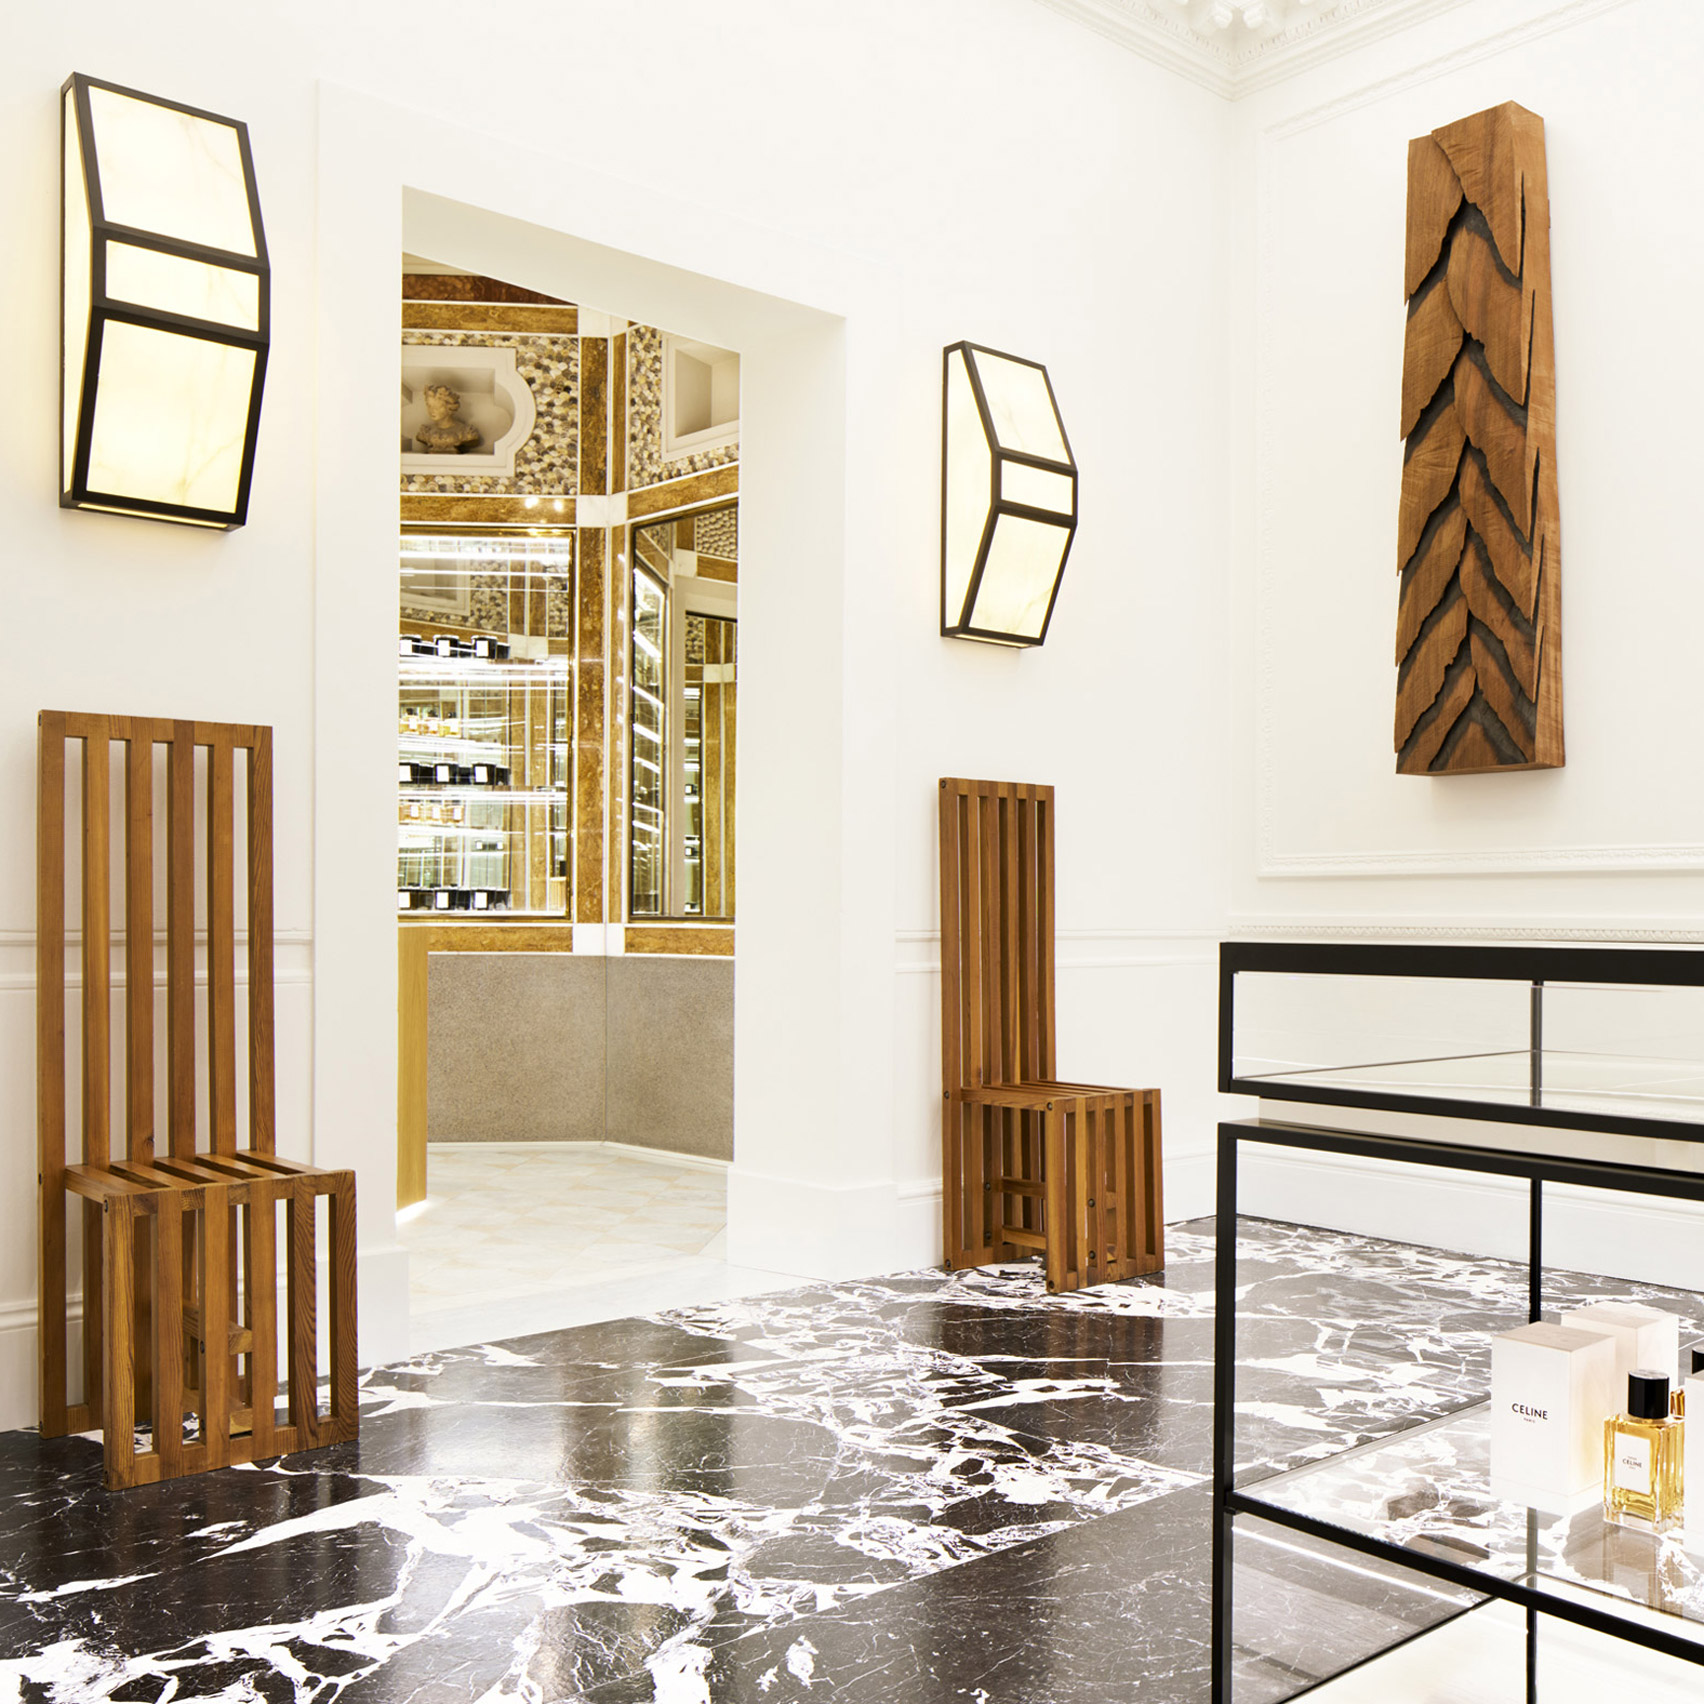 Fresh new 'do. Celine has officially unveiled their newly renovated store,  featuring unique design elements that reflect the brand's